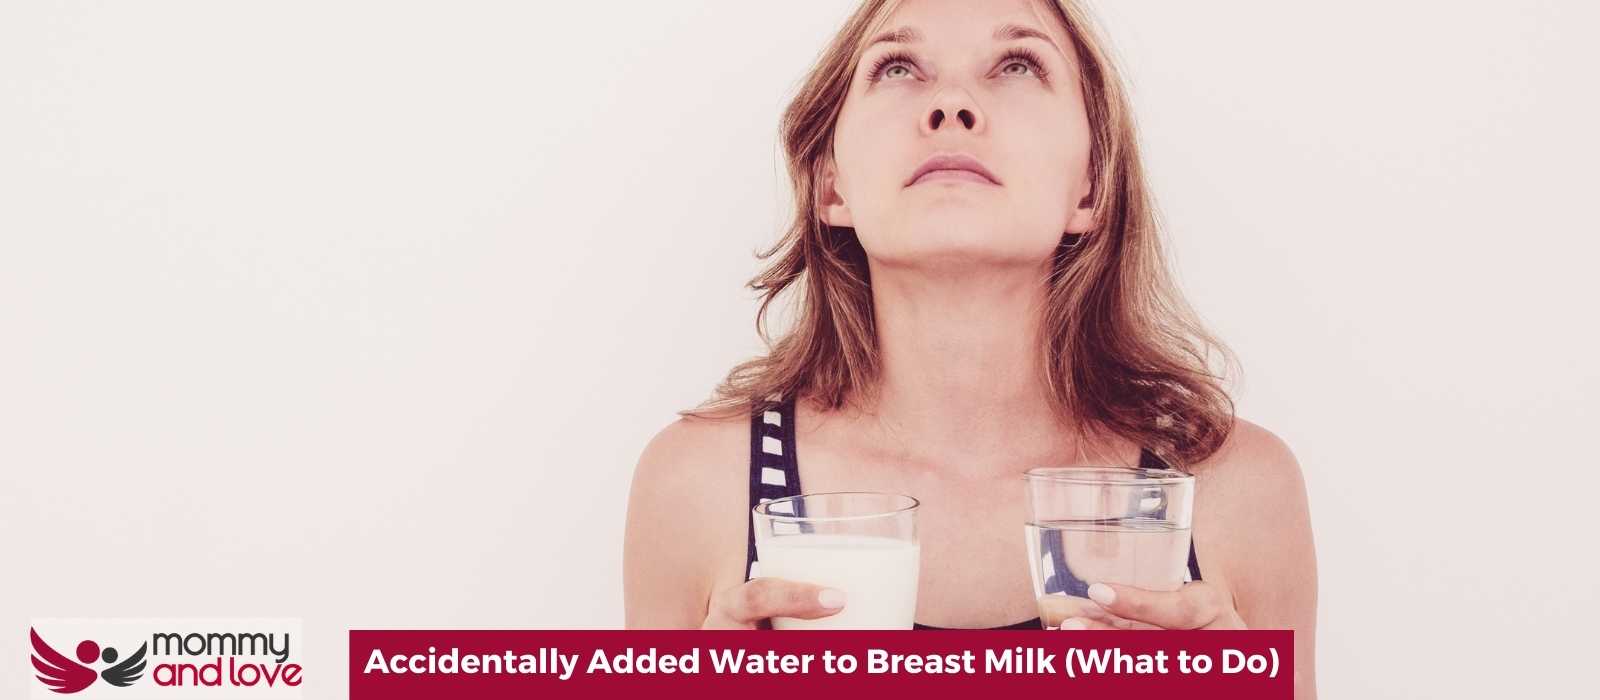 Accidentally Added Water to Breast Milk (What to Do)